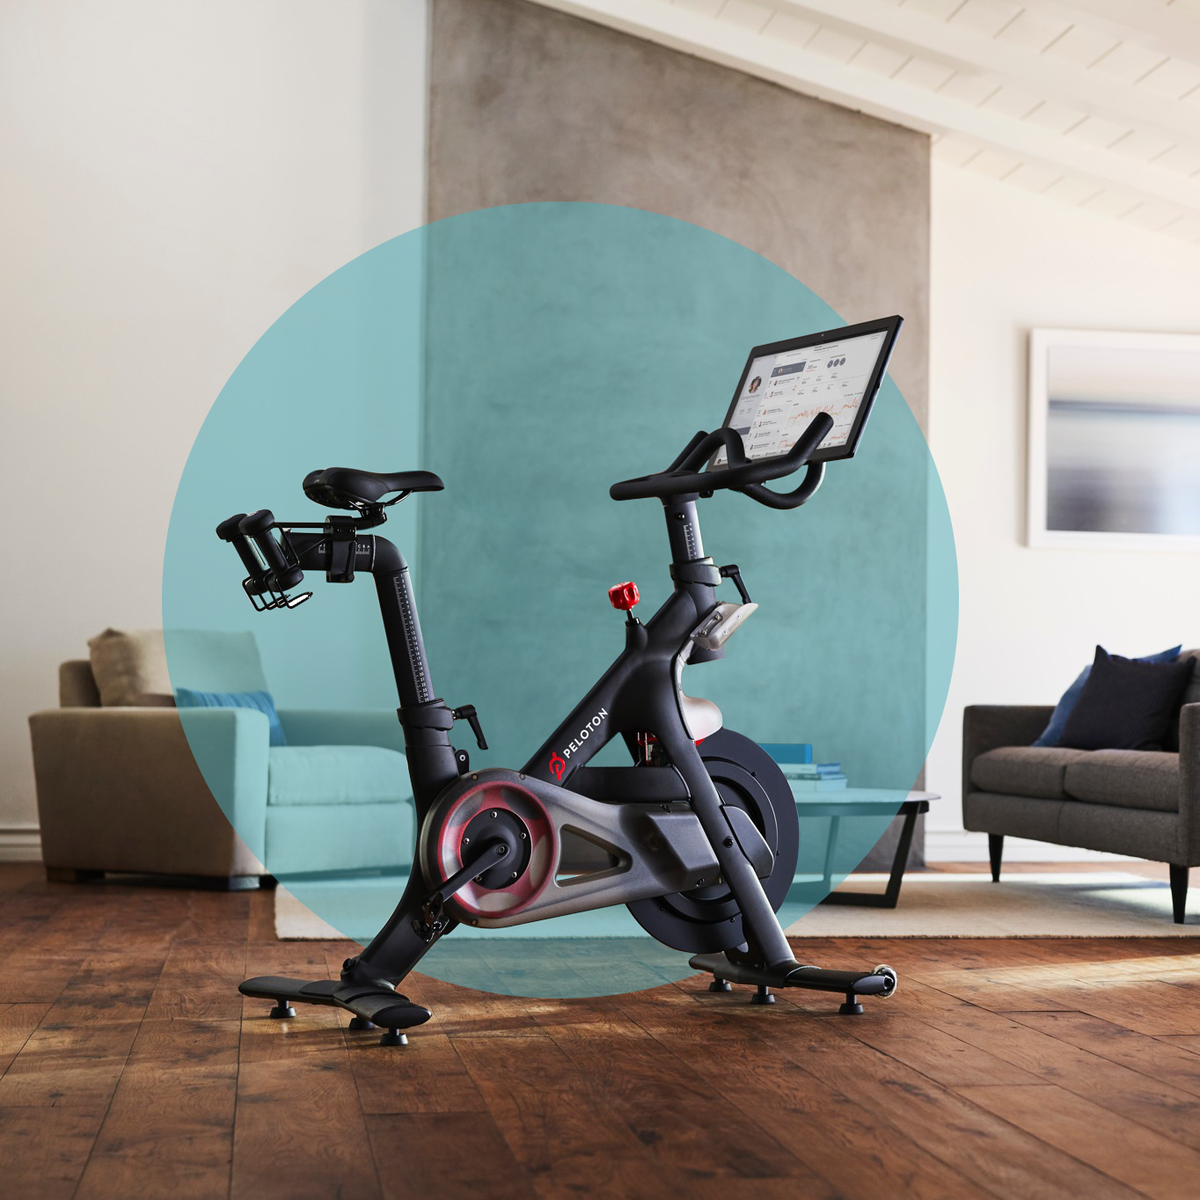 Are Peloton Instructor Salaries Really High? Details